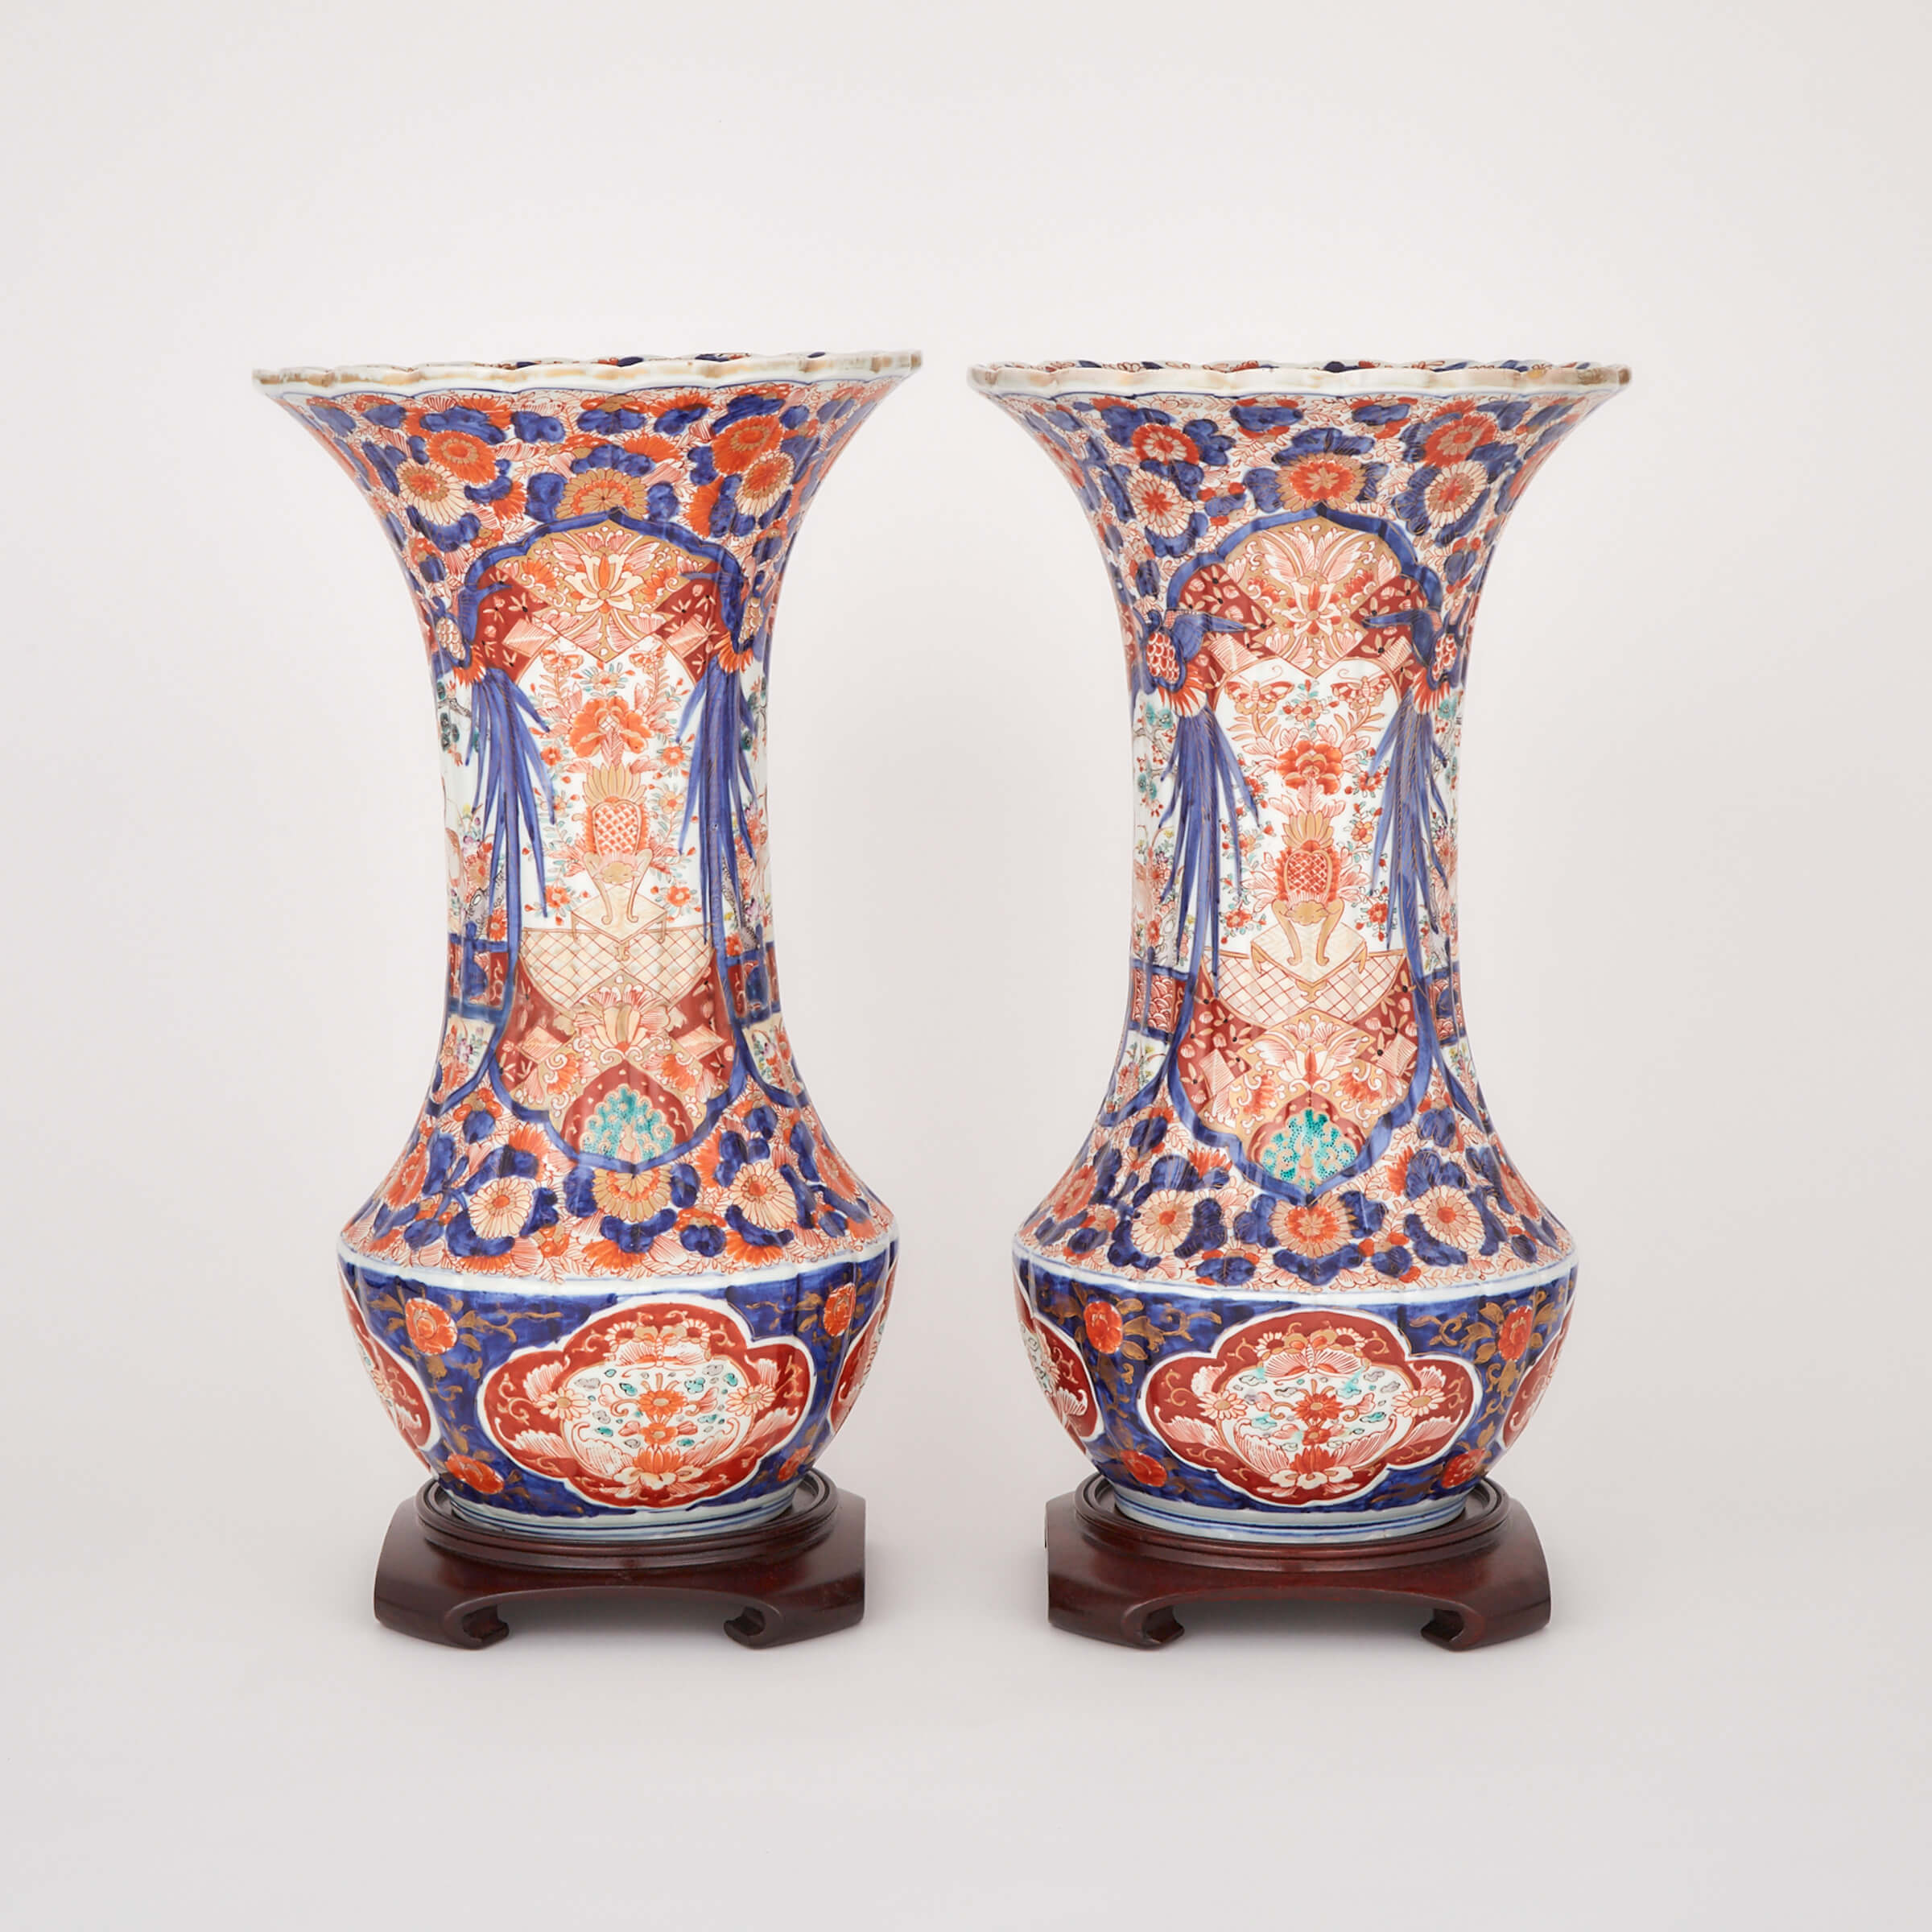 A Pair of Large Imari Vases, Late 19th/Early 20th century 